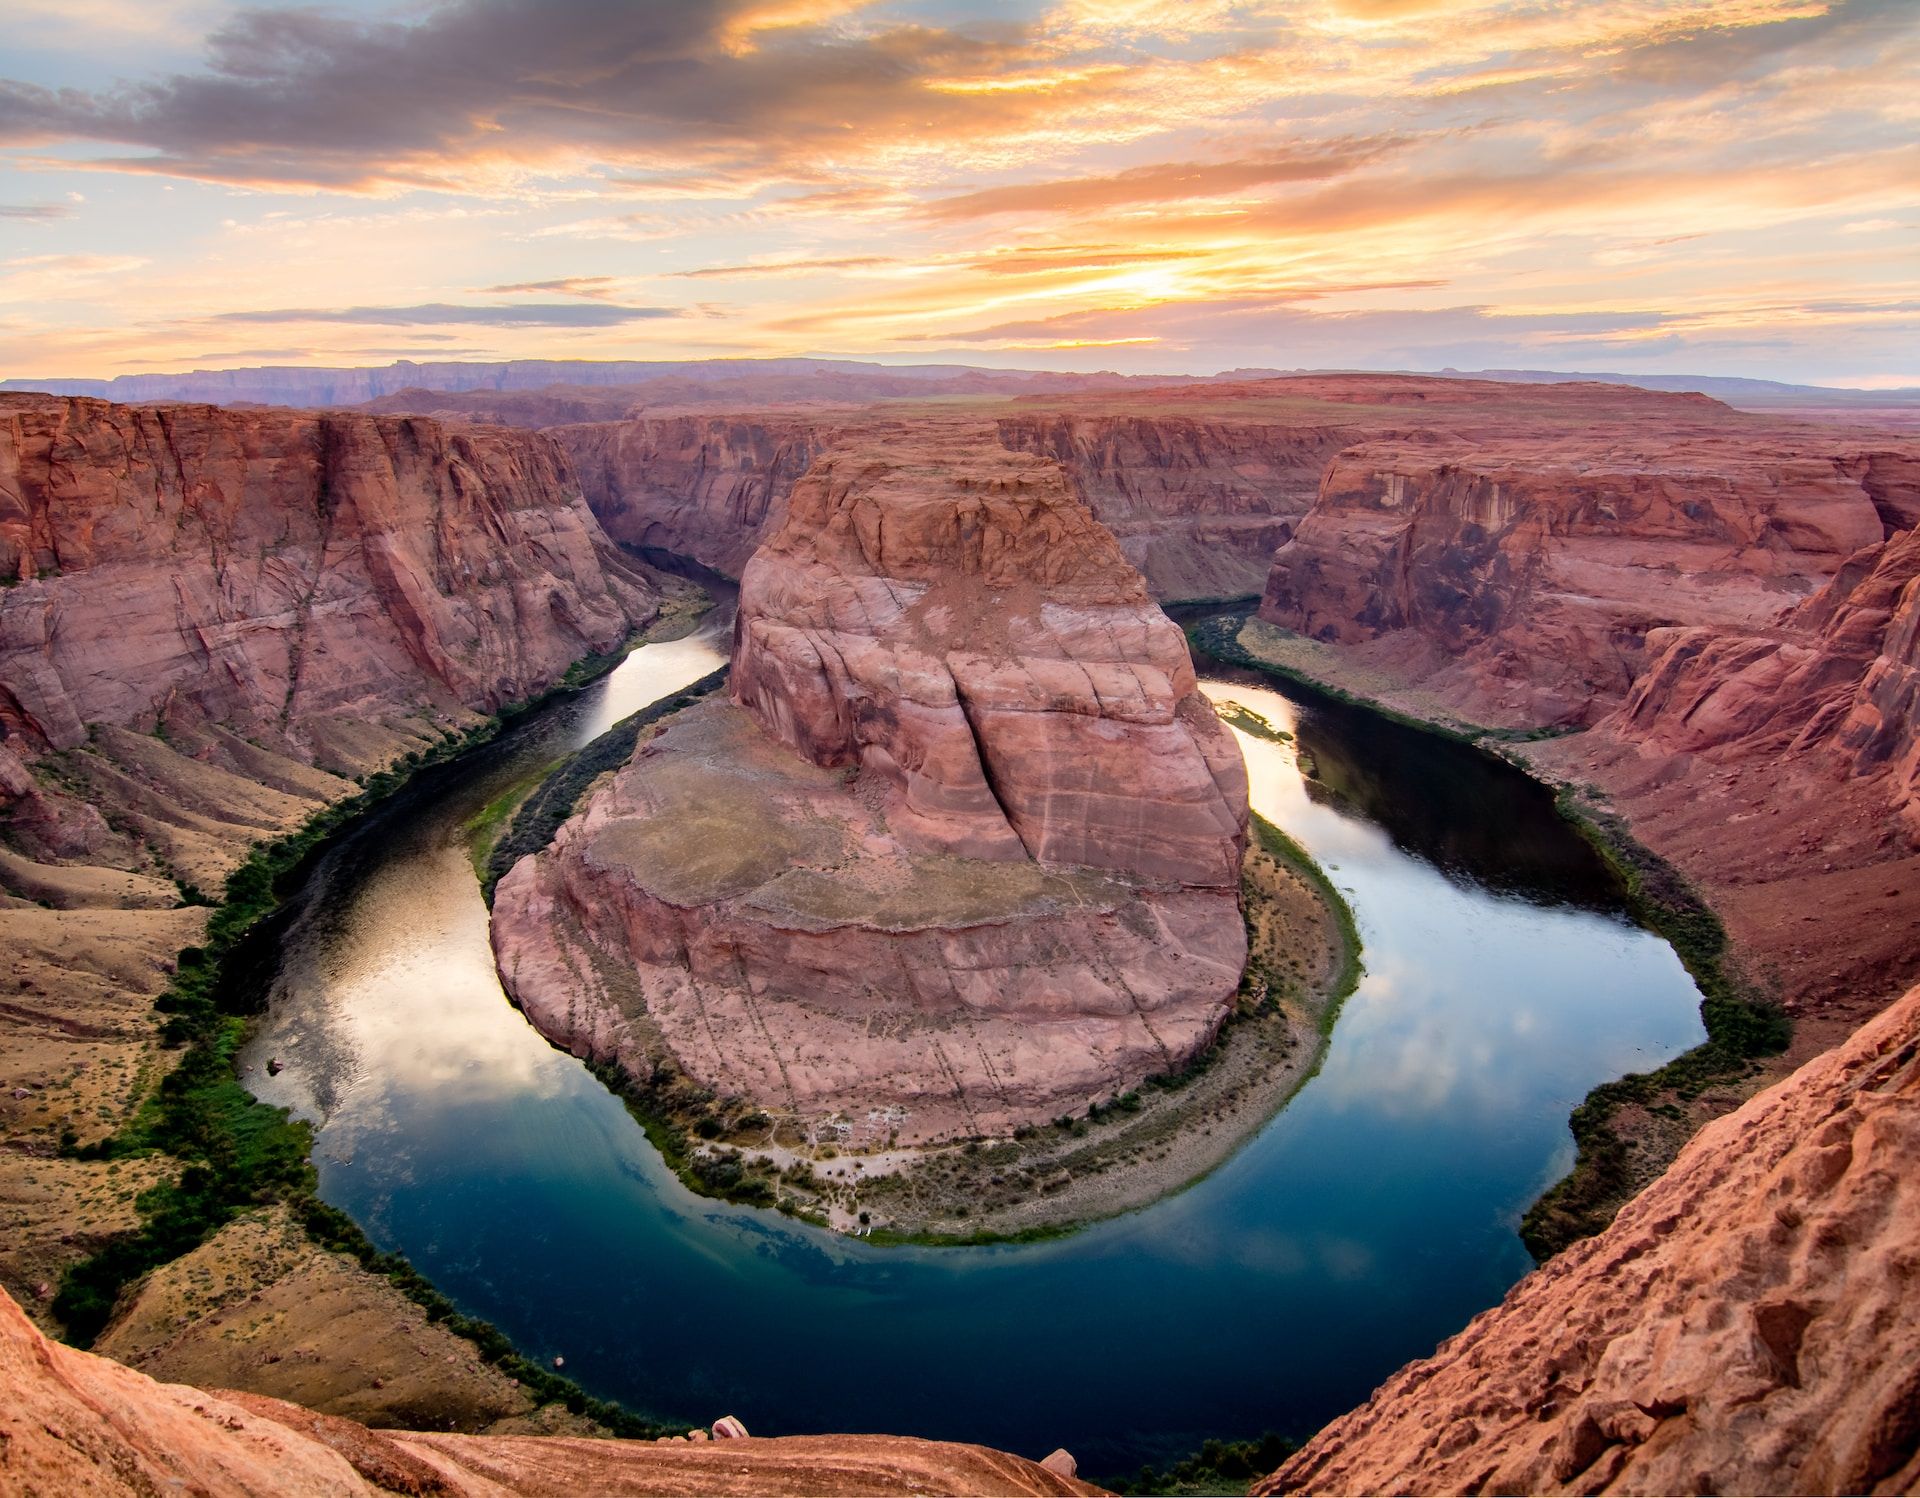 10 Things To Do In Grand Canyon National Park: Complete Guide To The ...